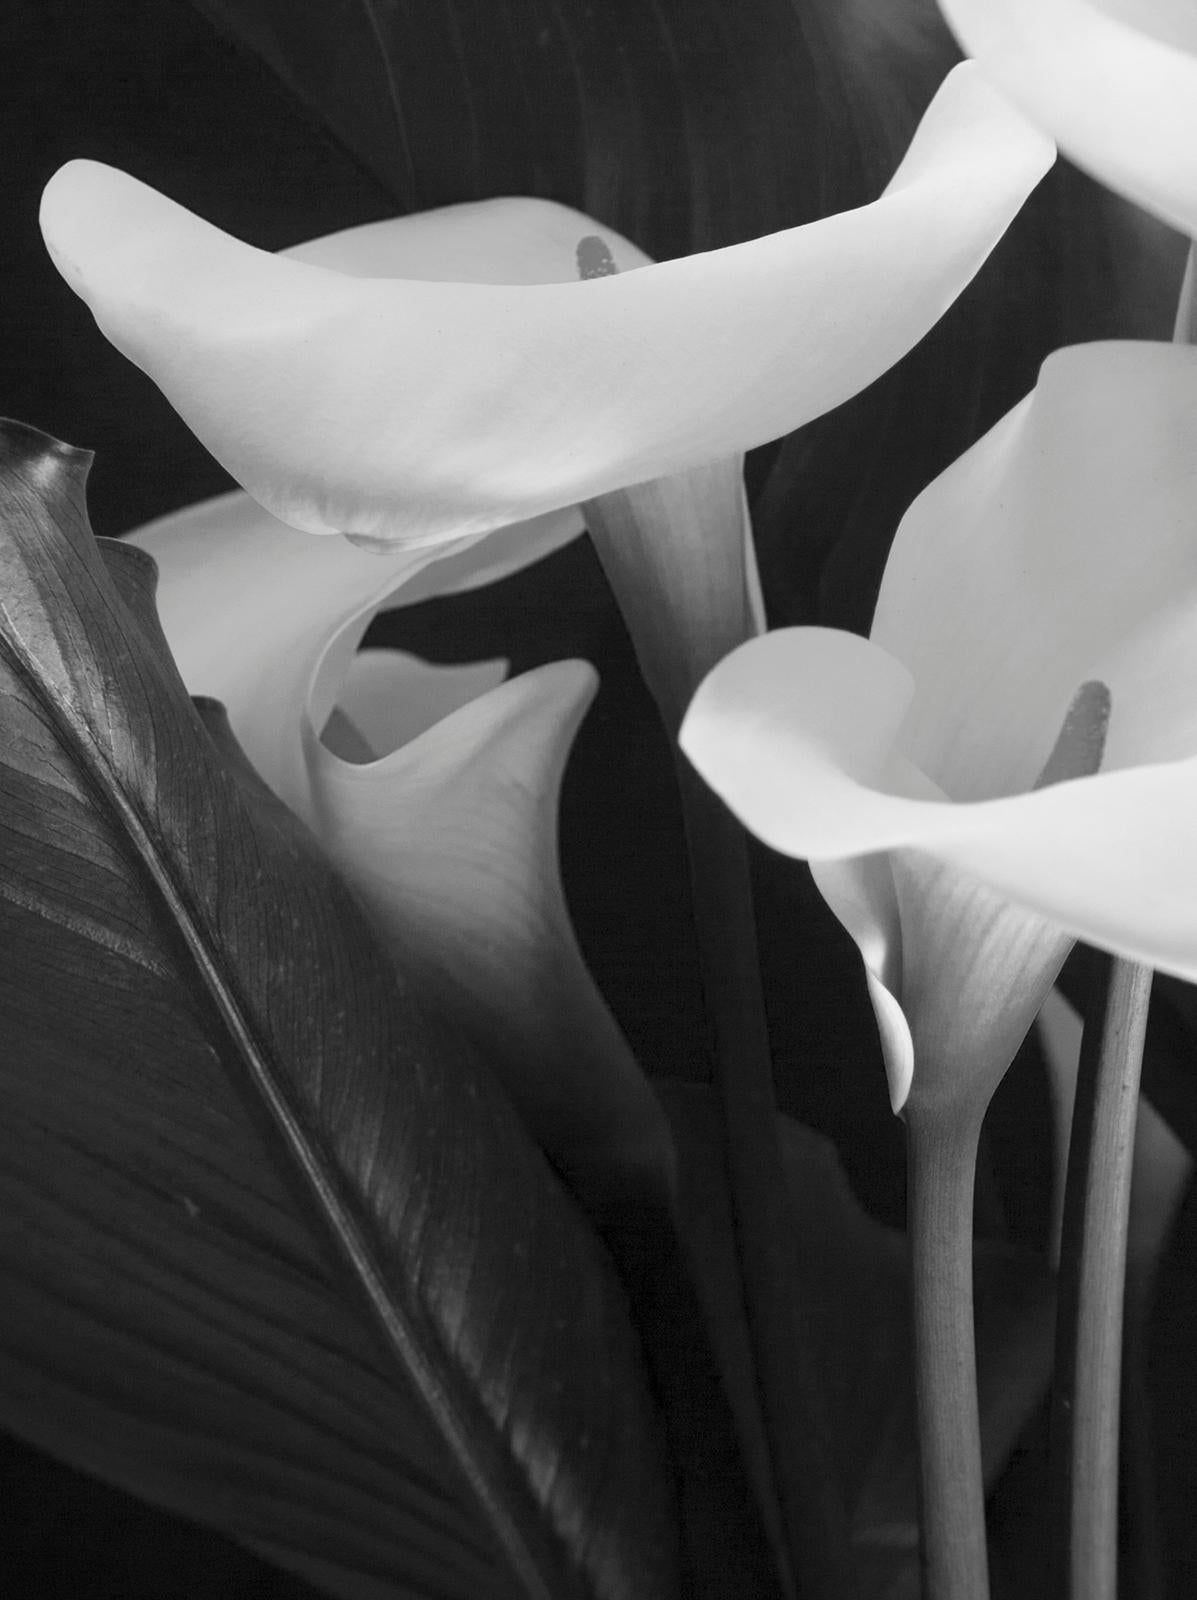 Arum Lilies - Signed limited edition still life print, Black white photo, Nature - Photograph by Ian Sanderson